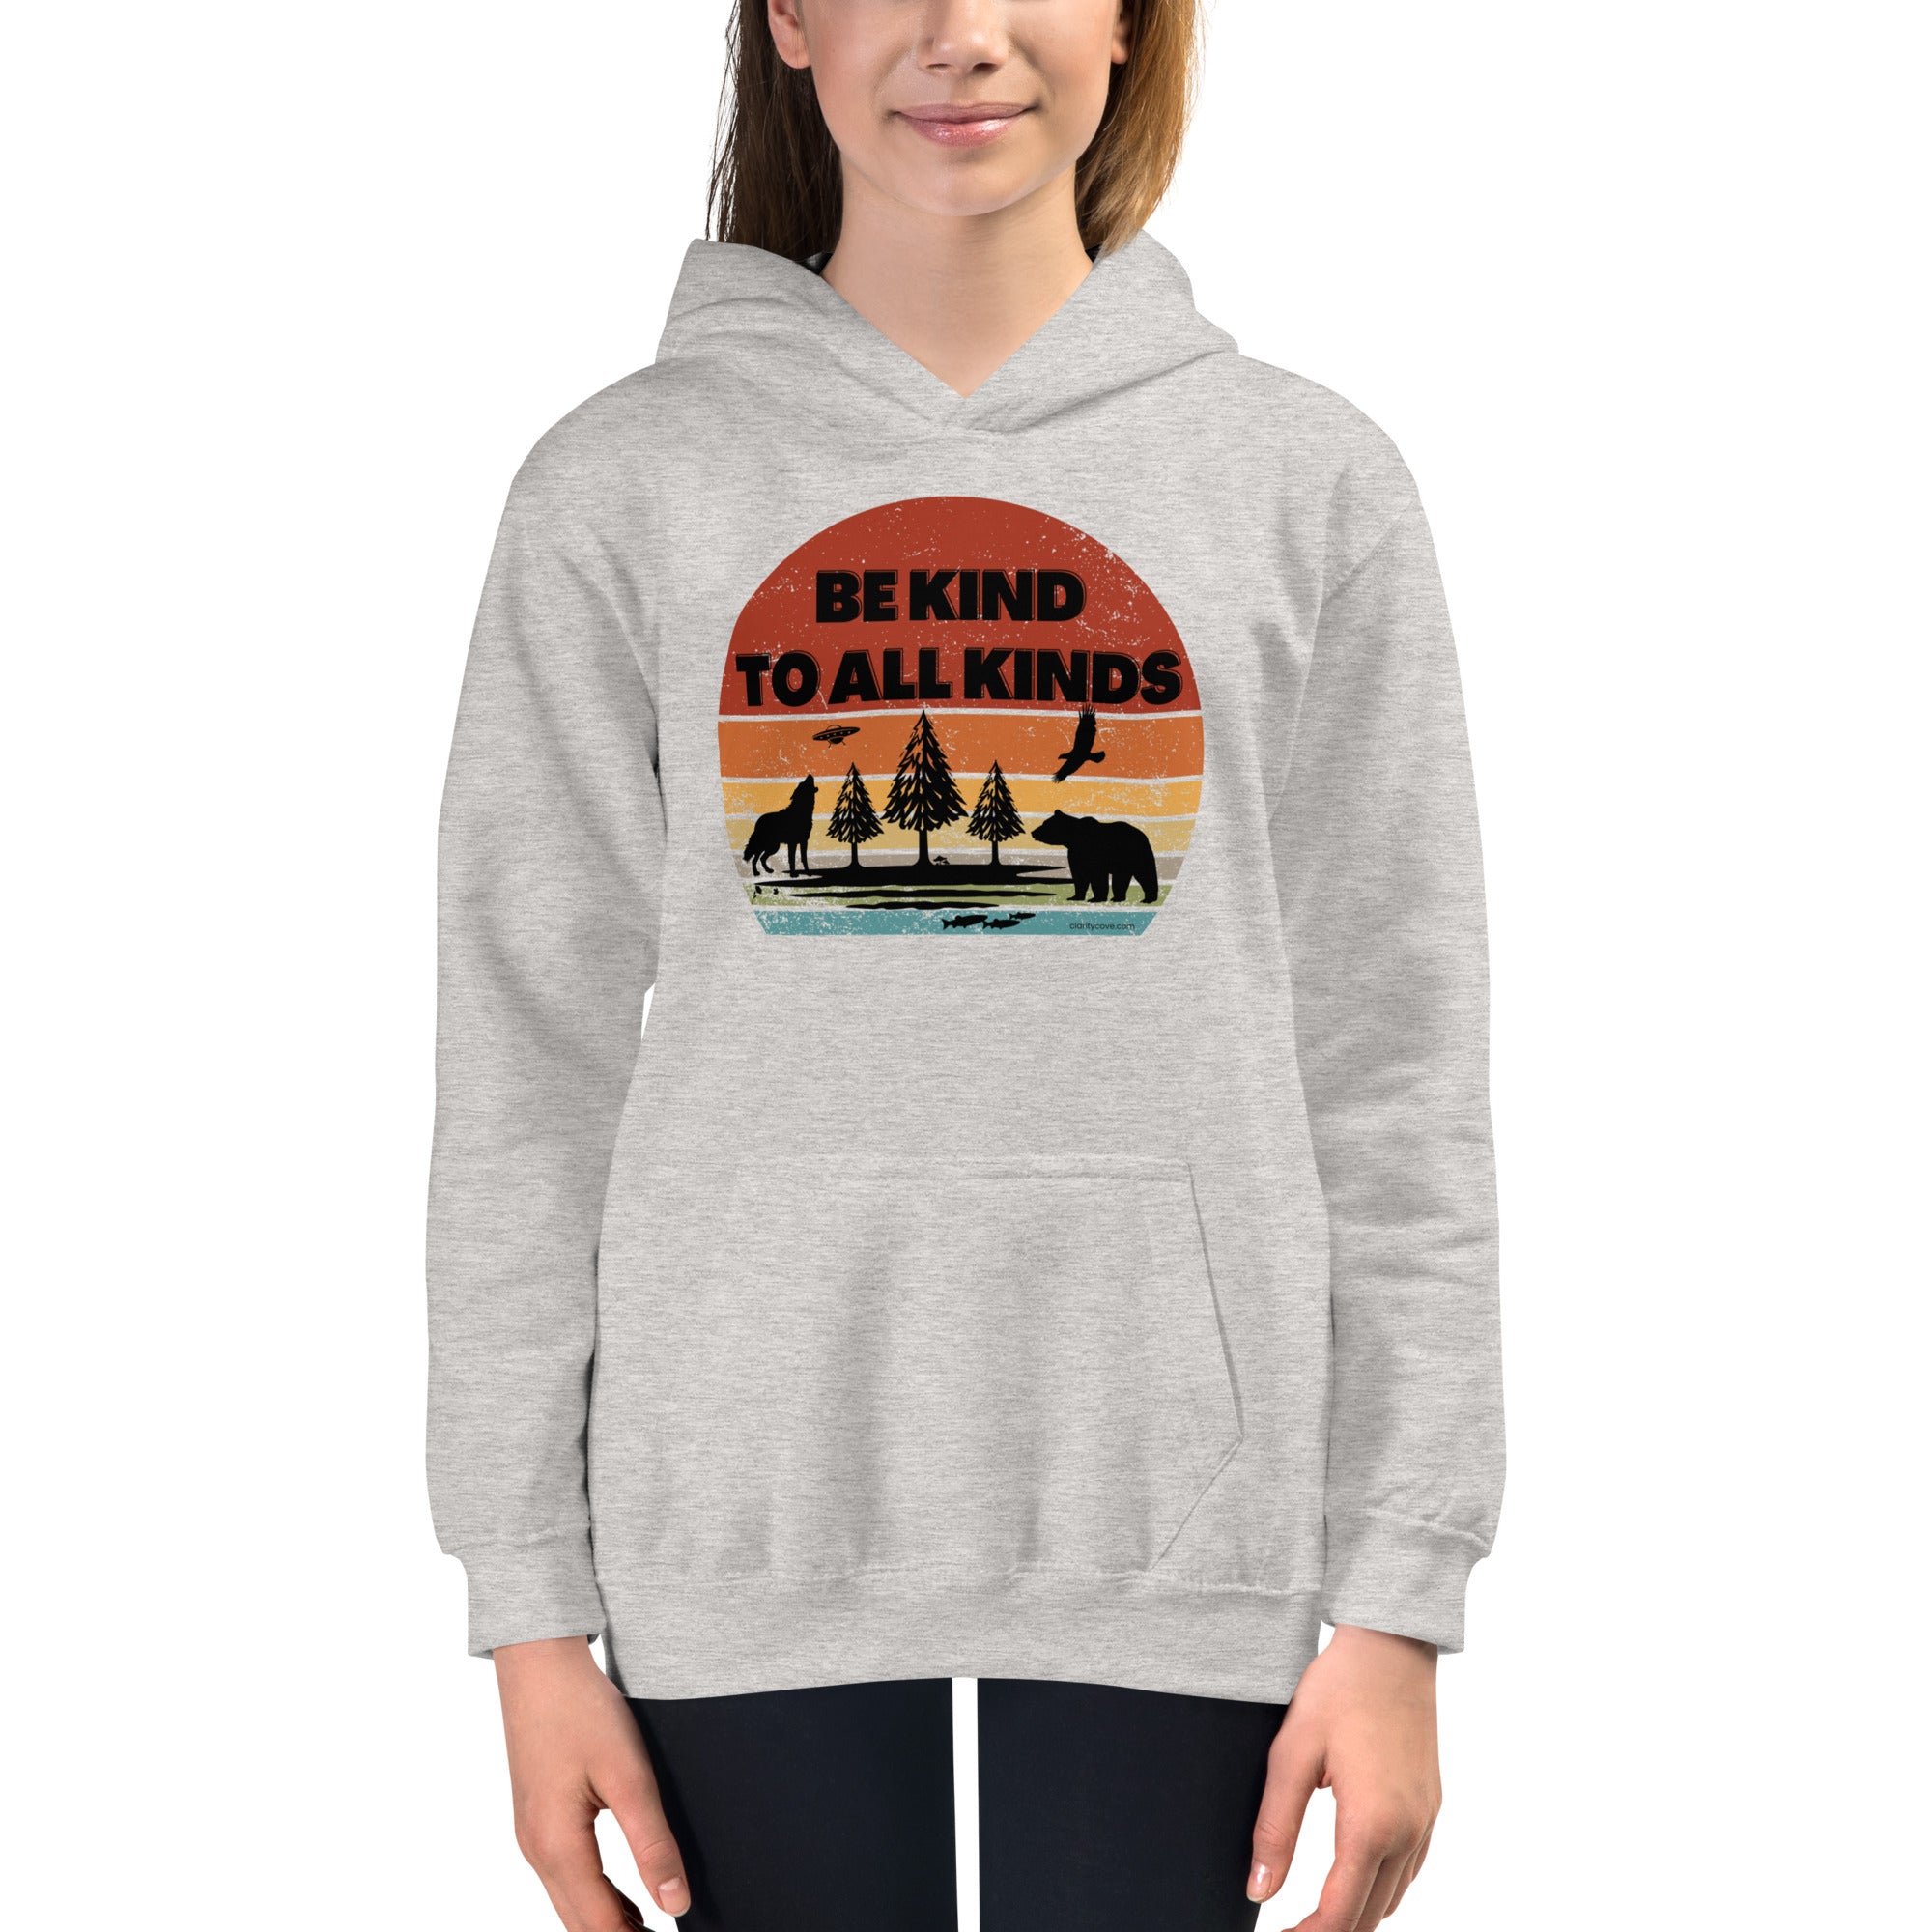 be kind to all kinds kids hoodie hooded sweatshirt by clarity cove gray